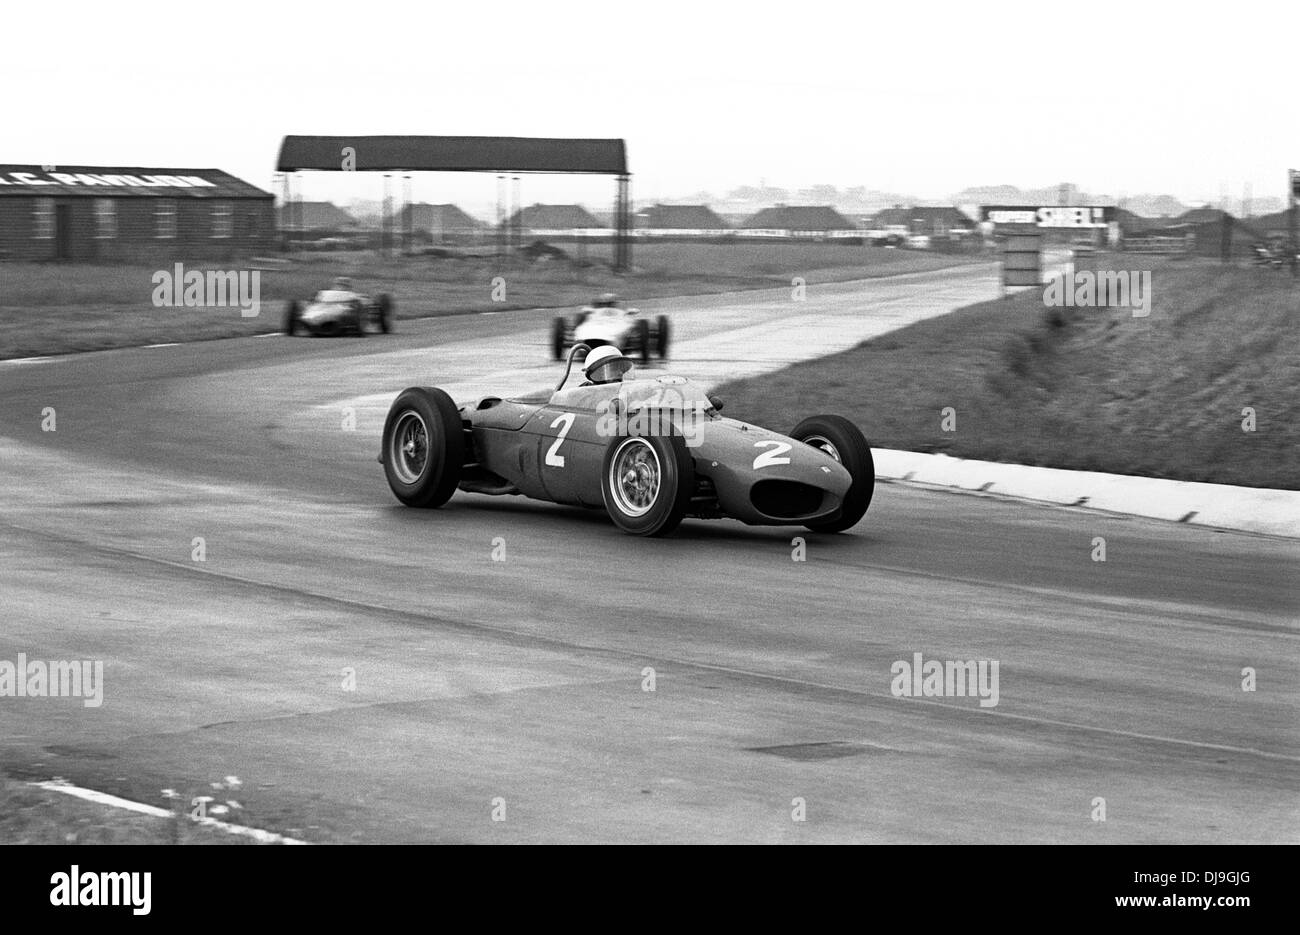 Phil Hill in a Ferrari 156 'Sharknose', finished 2nd in the British Grand Prix, Aintree, England 15 July 1961. Stock Photo